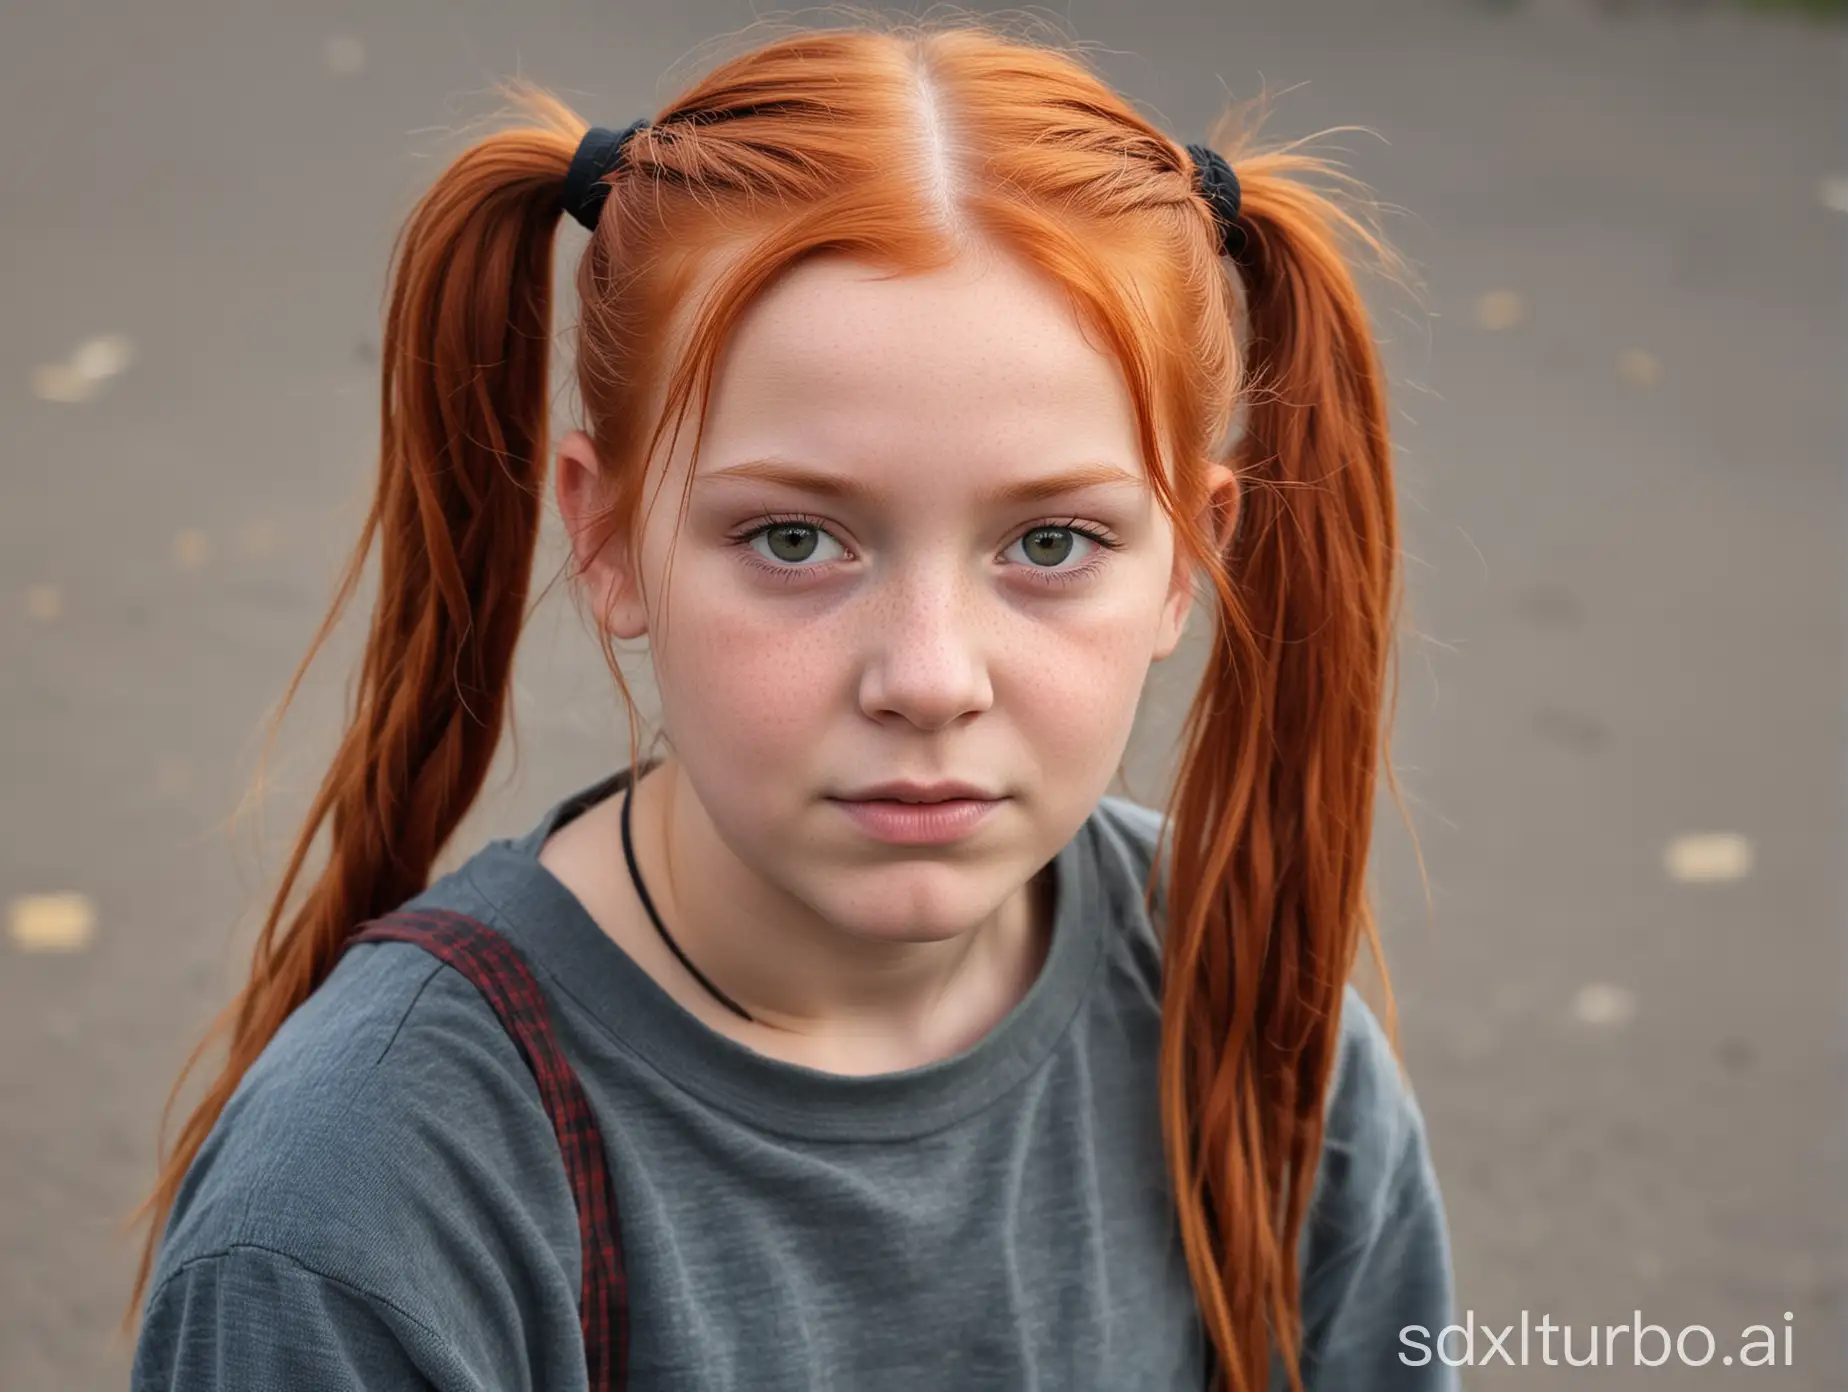 Portrait-of-a-RedHaired-ElevenYearOld-Girl-with-Pigtails